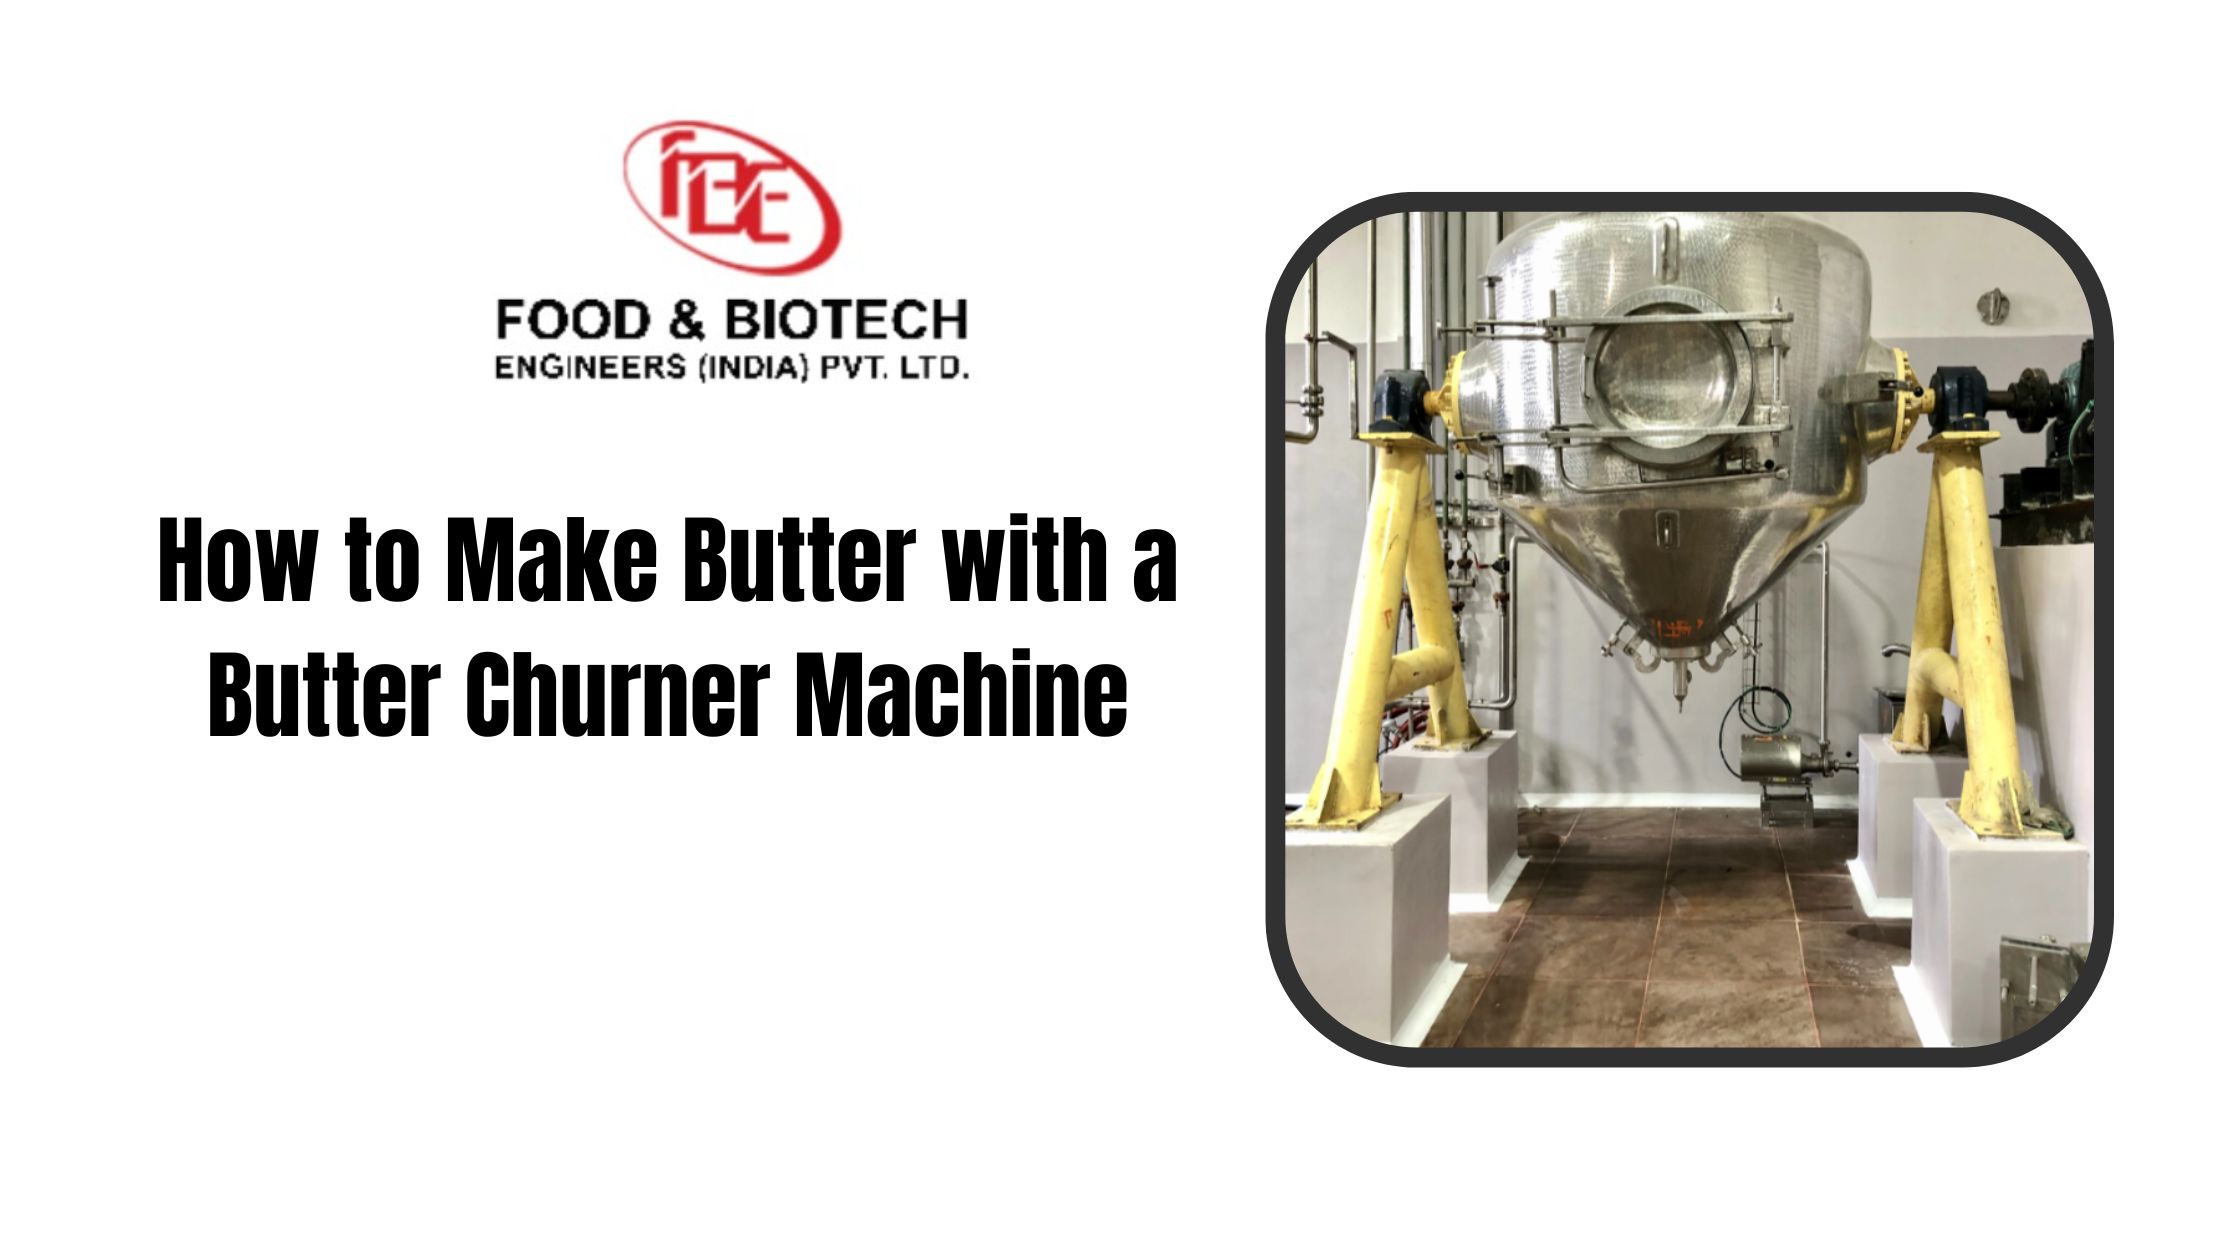 How to Make Butter with a Butter Churner Machine